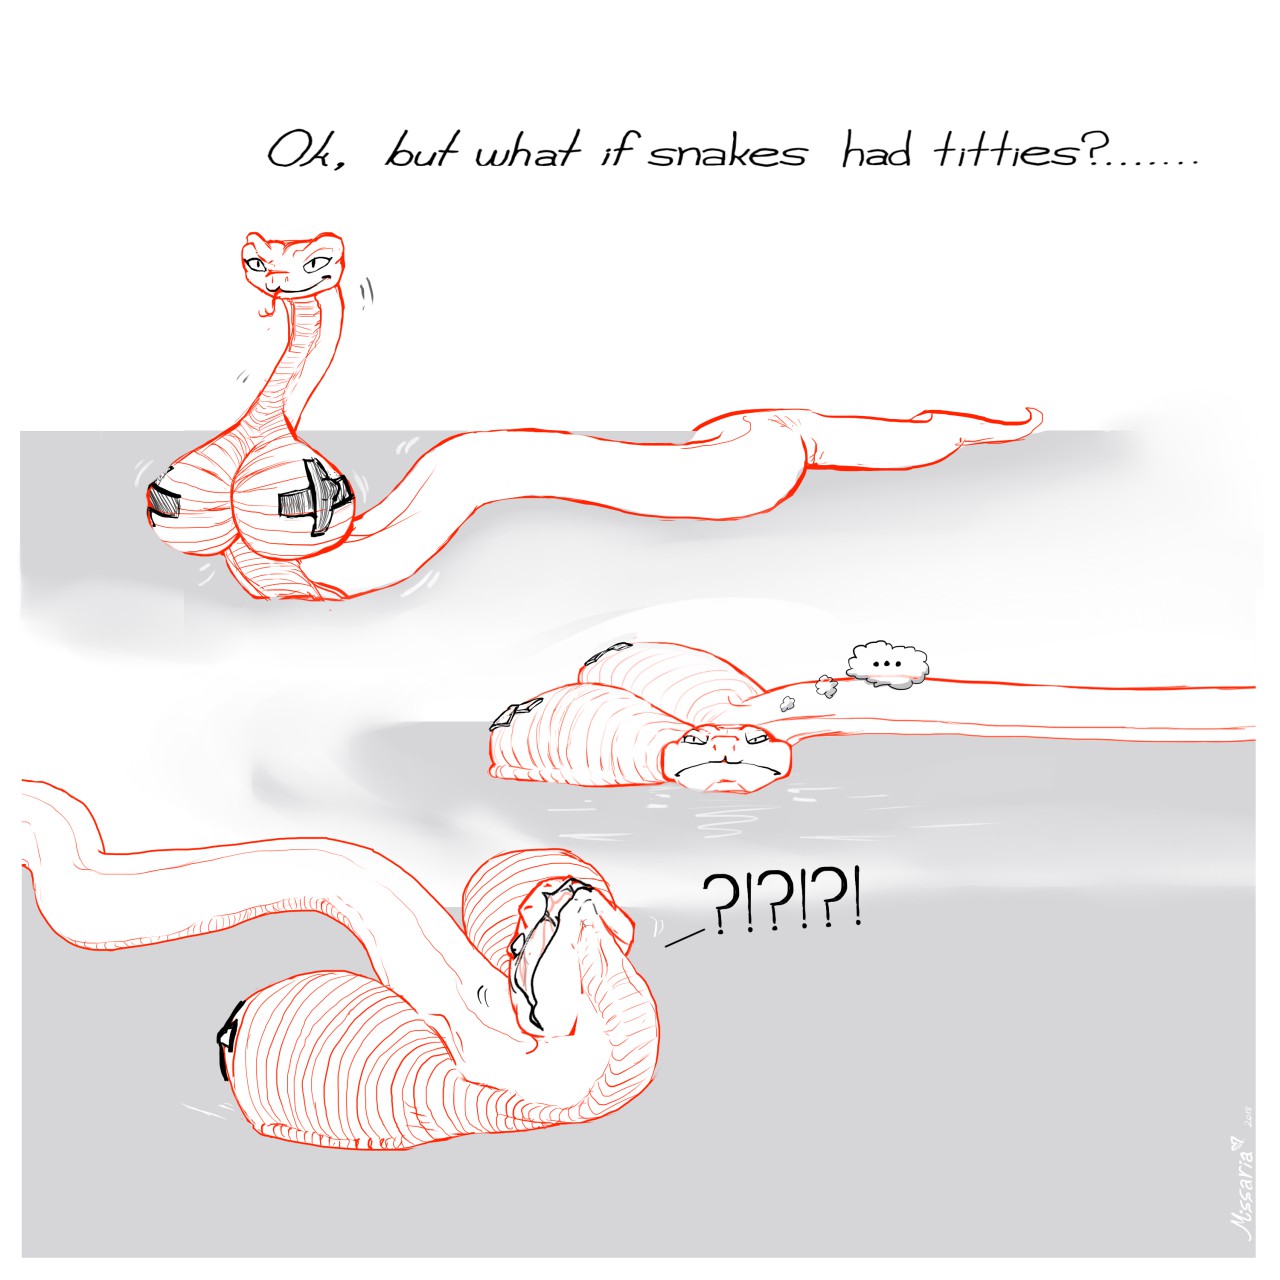 Ok, but what if snakes had titties? (Personal Sketch) by Missaria